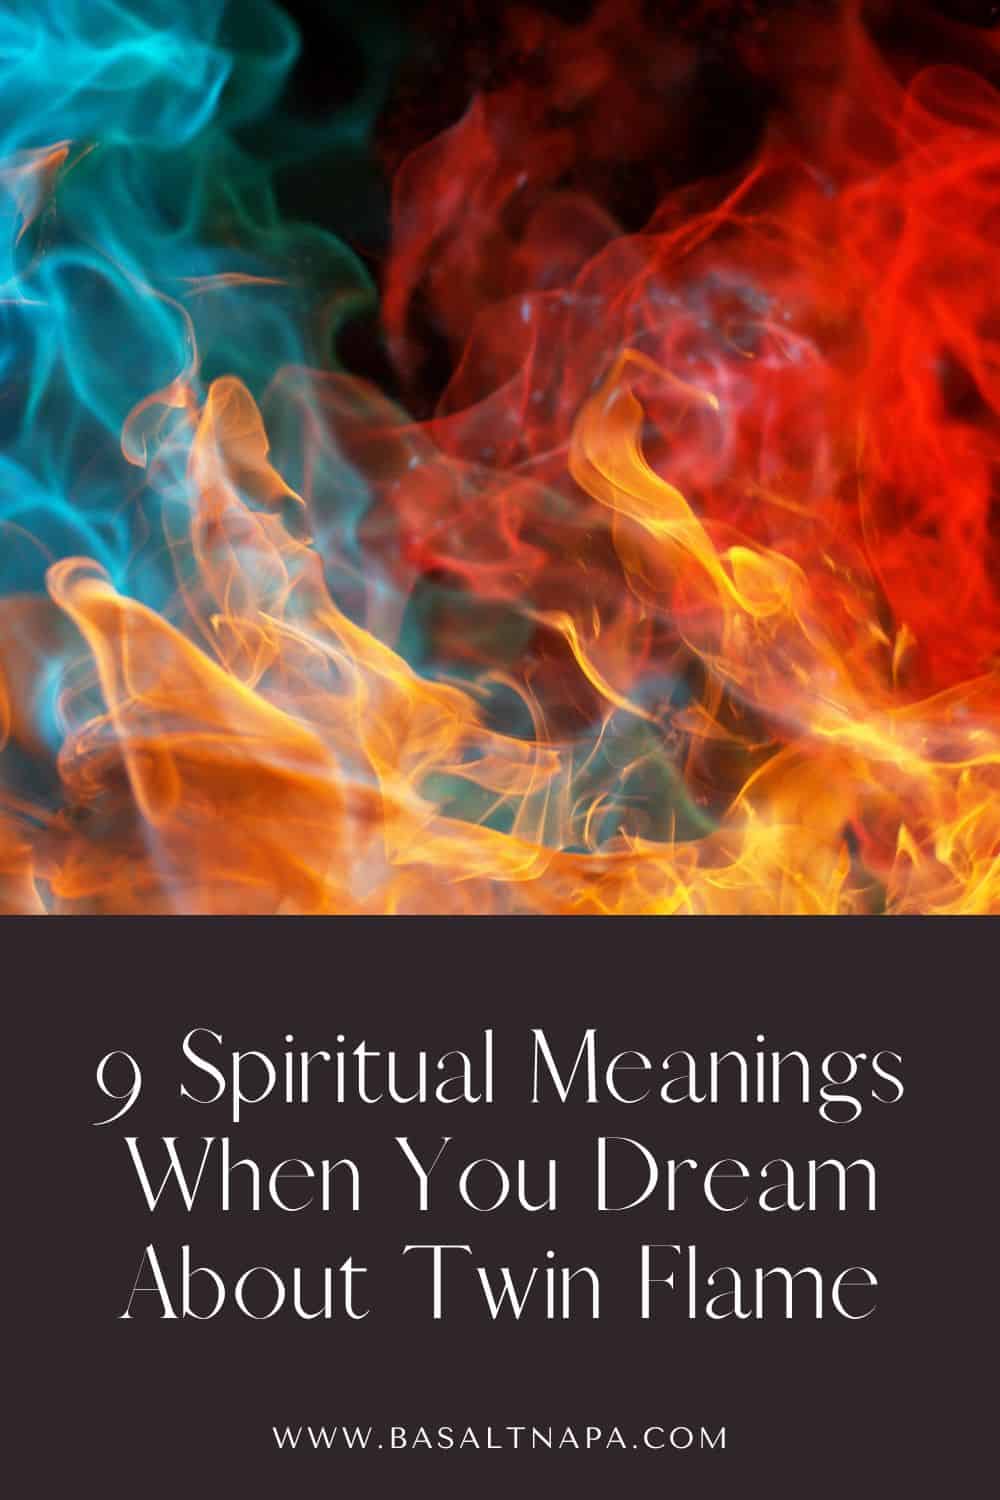 What Does A Twin Flame Dream Mean?